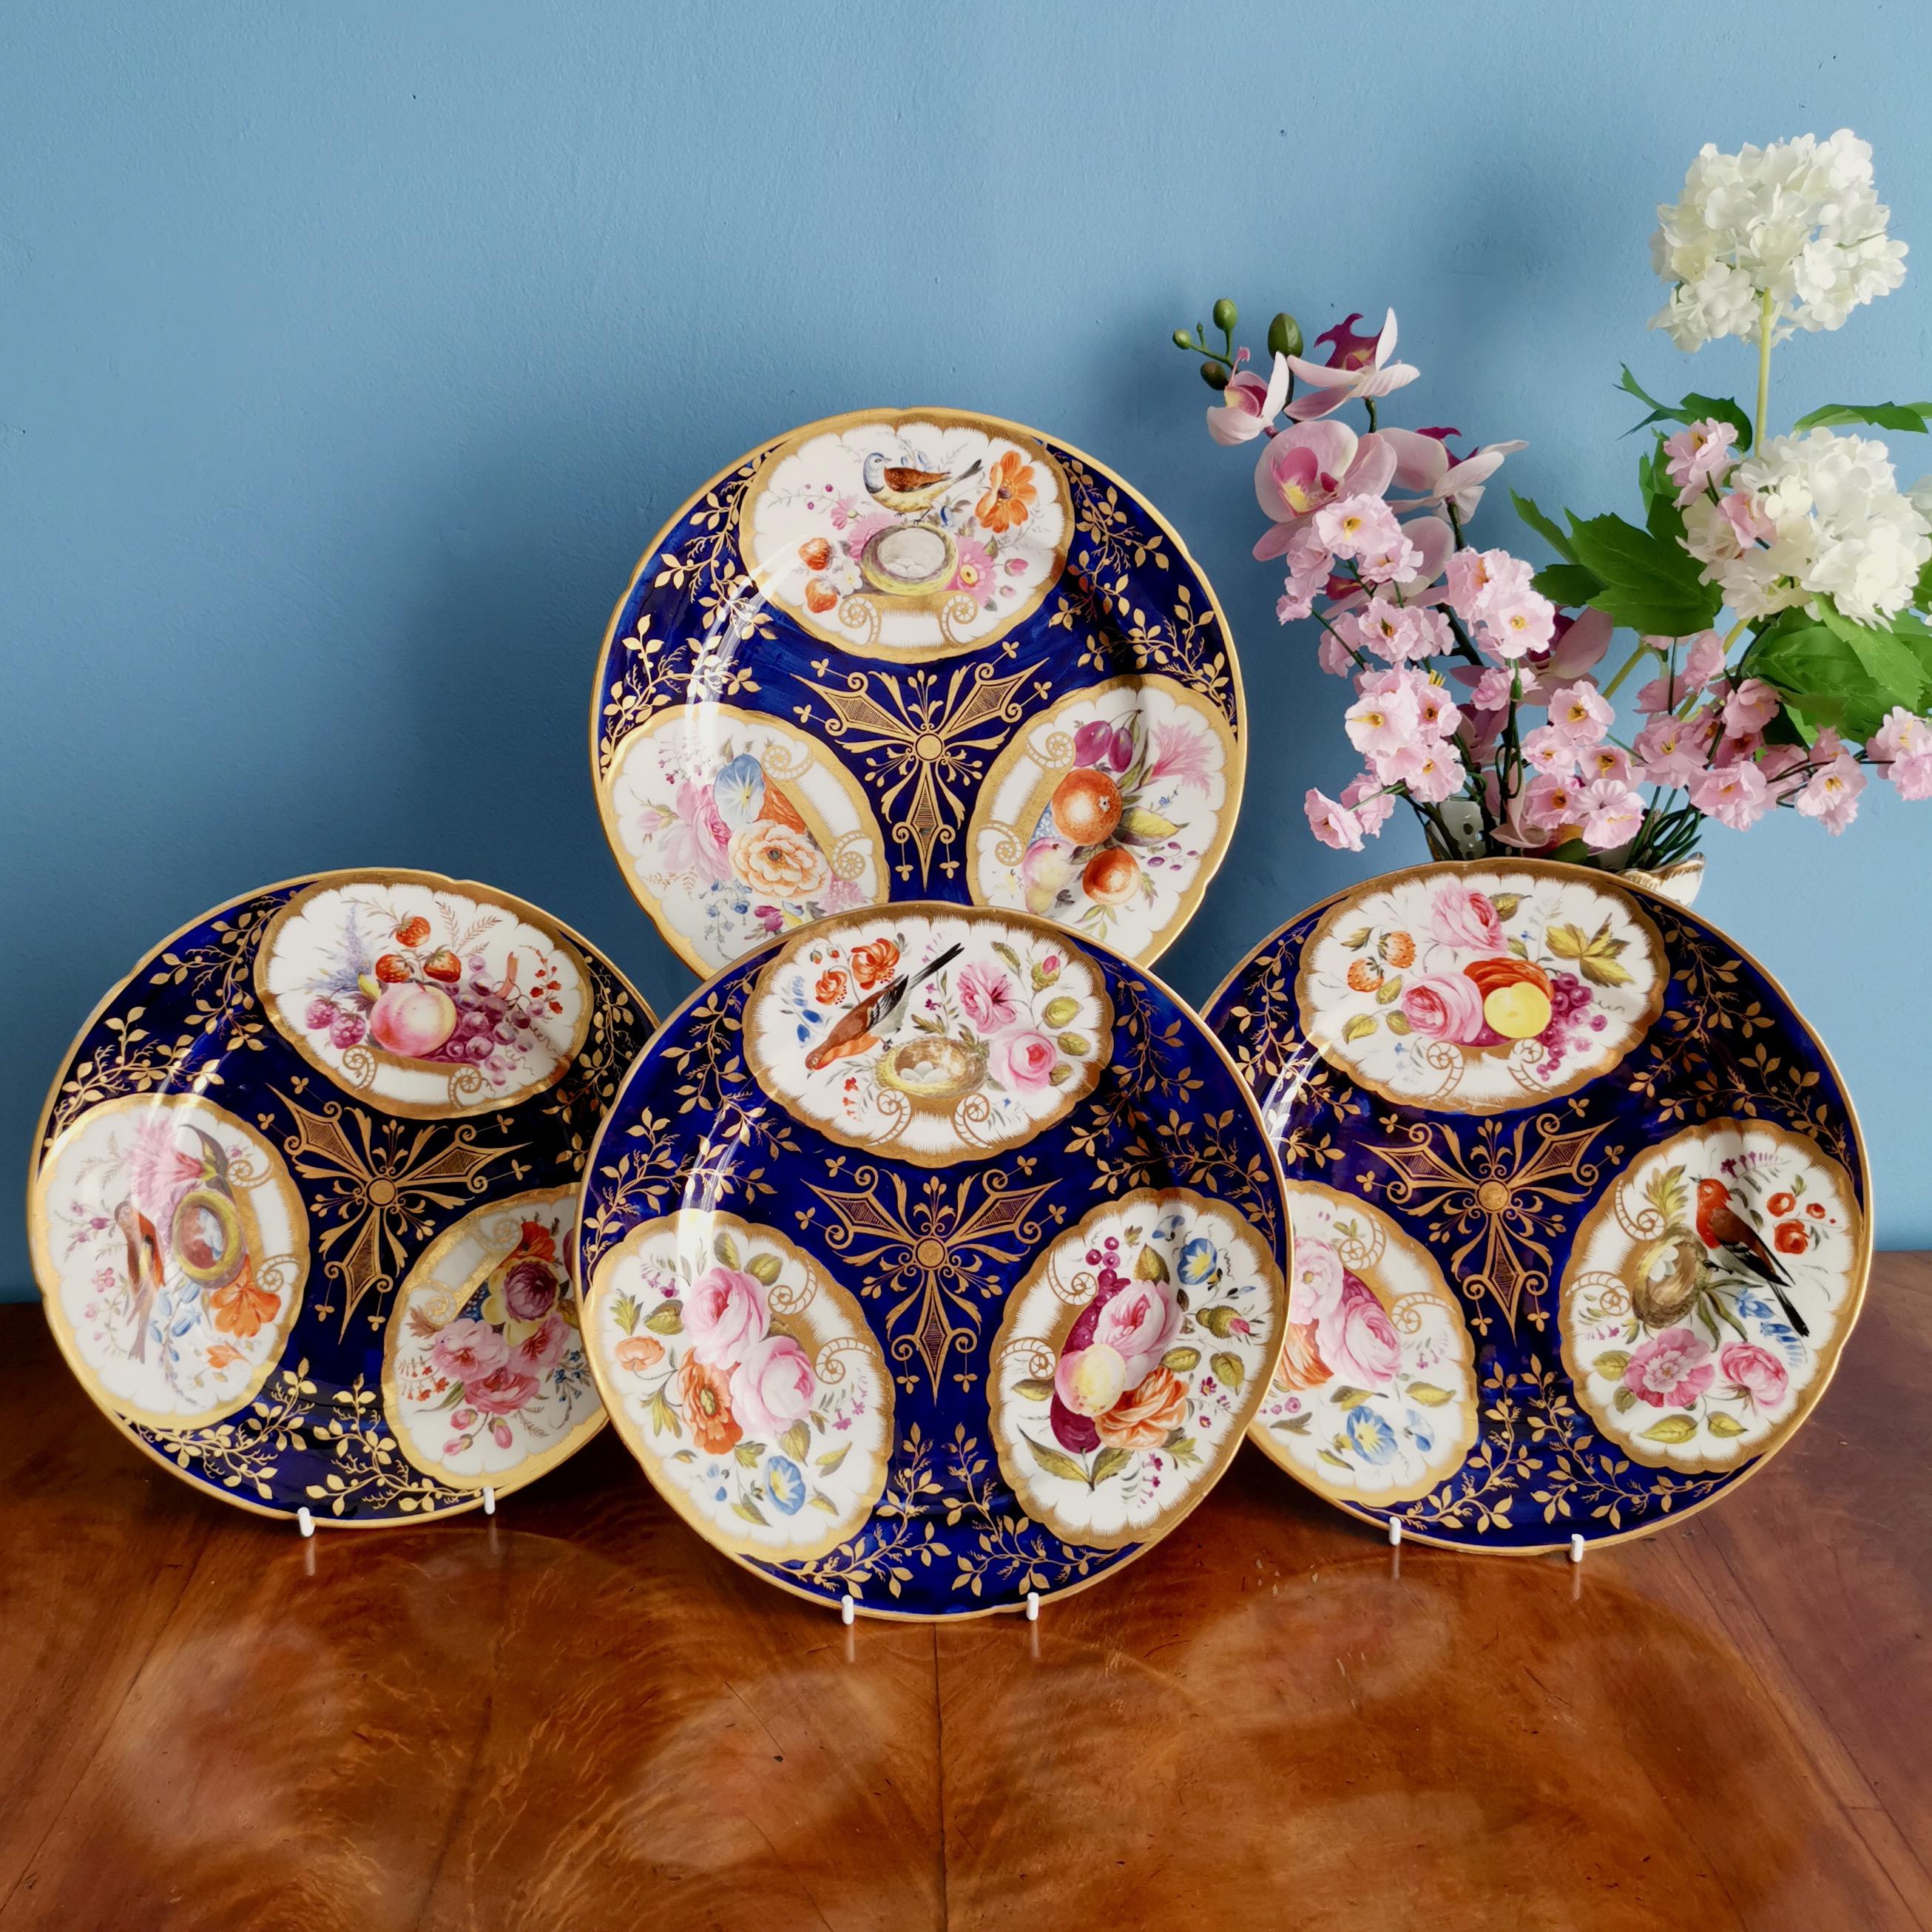 This is a set of four beautiful dessert plates made by John Rose at Coalport between 1805 and 1810. The plates have a cobalt blue ground, beautiful gilding and stunning reserves with hand painted birds and flowers.

Coalport was one of the leading